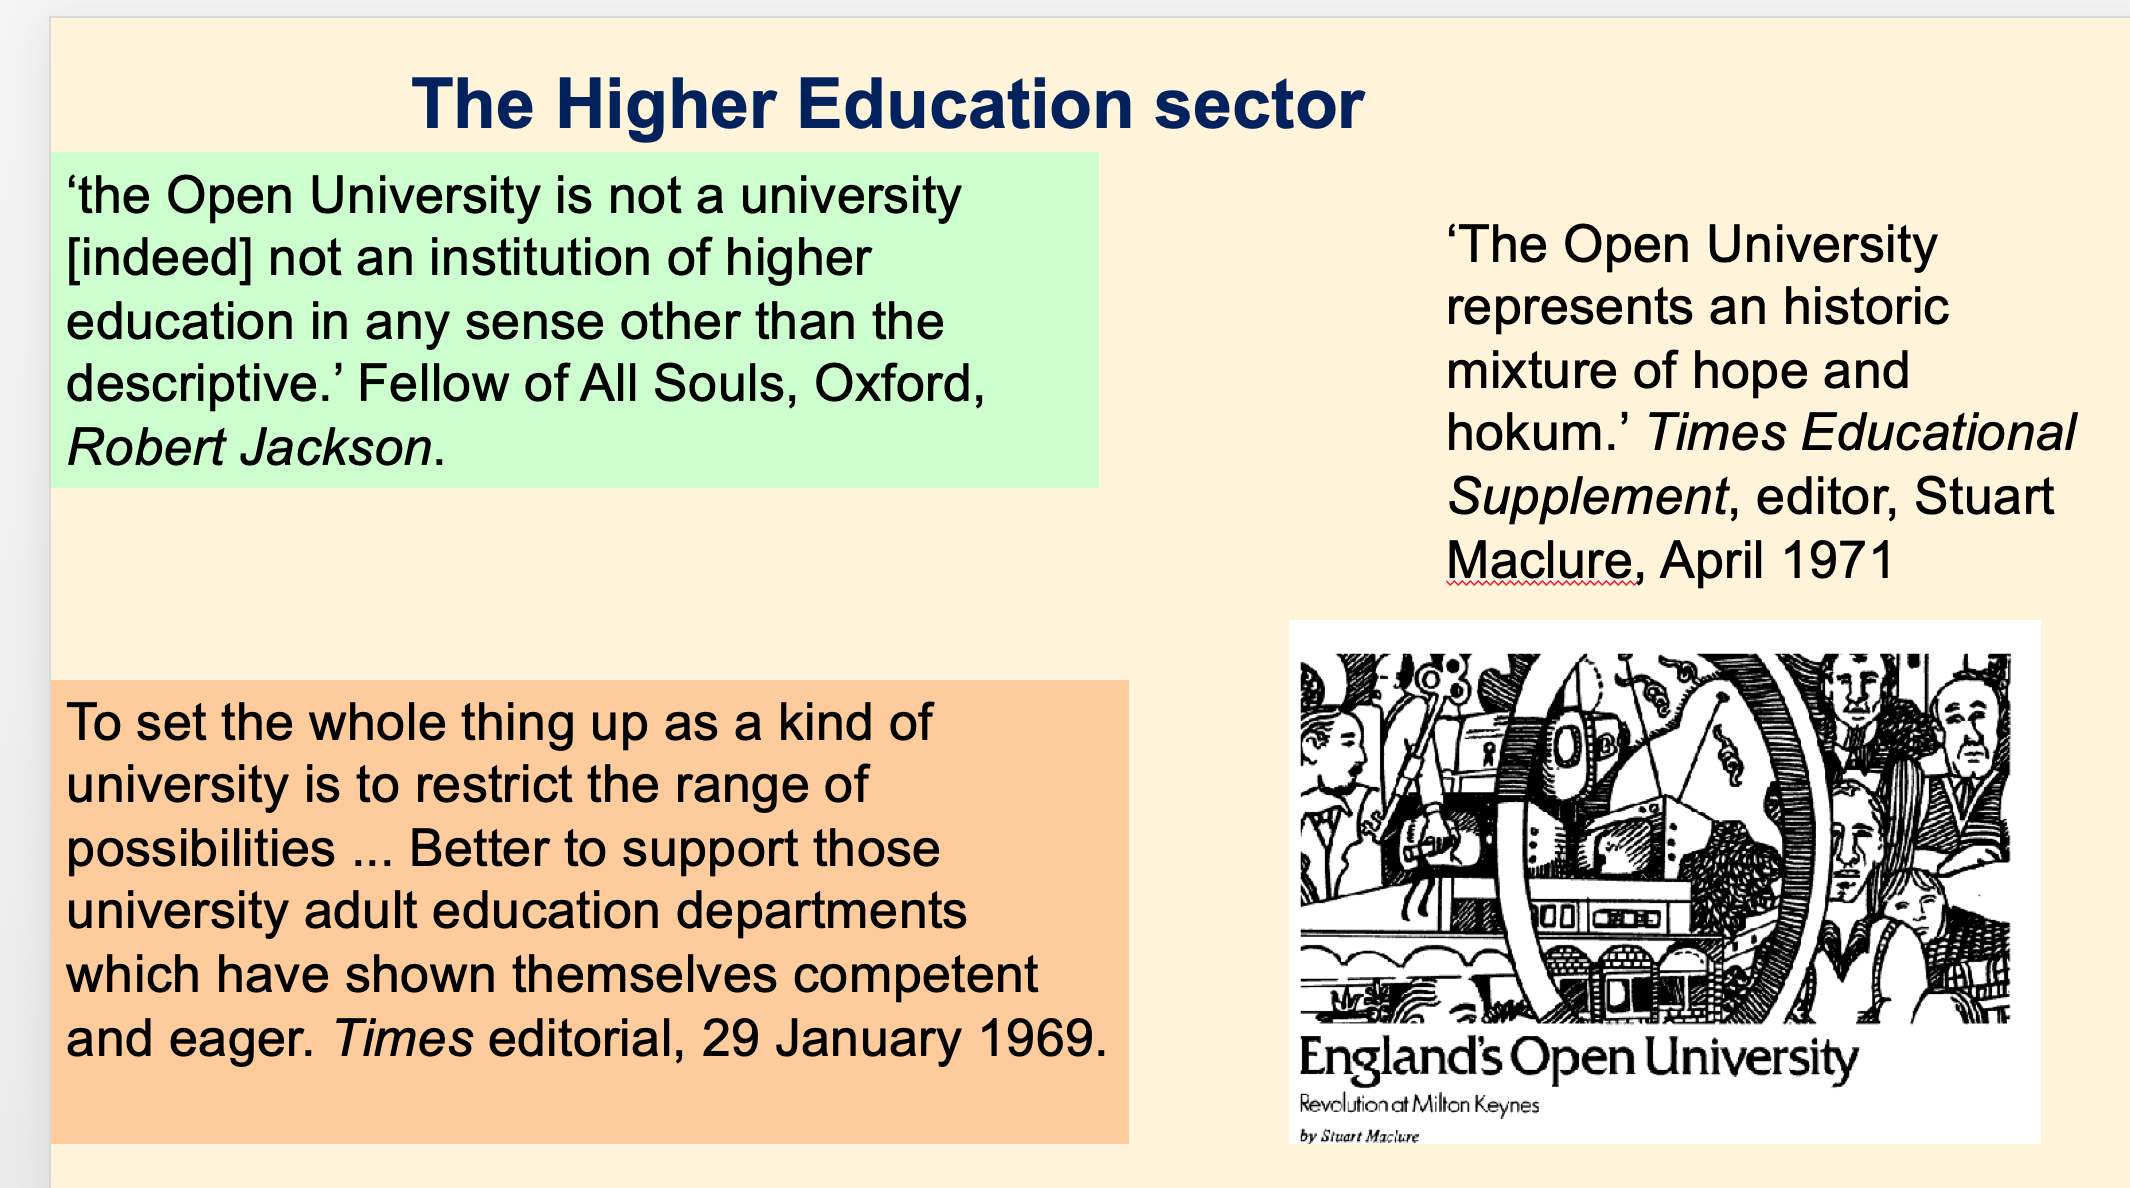 Interesting facts about OU students, The Open University